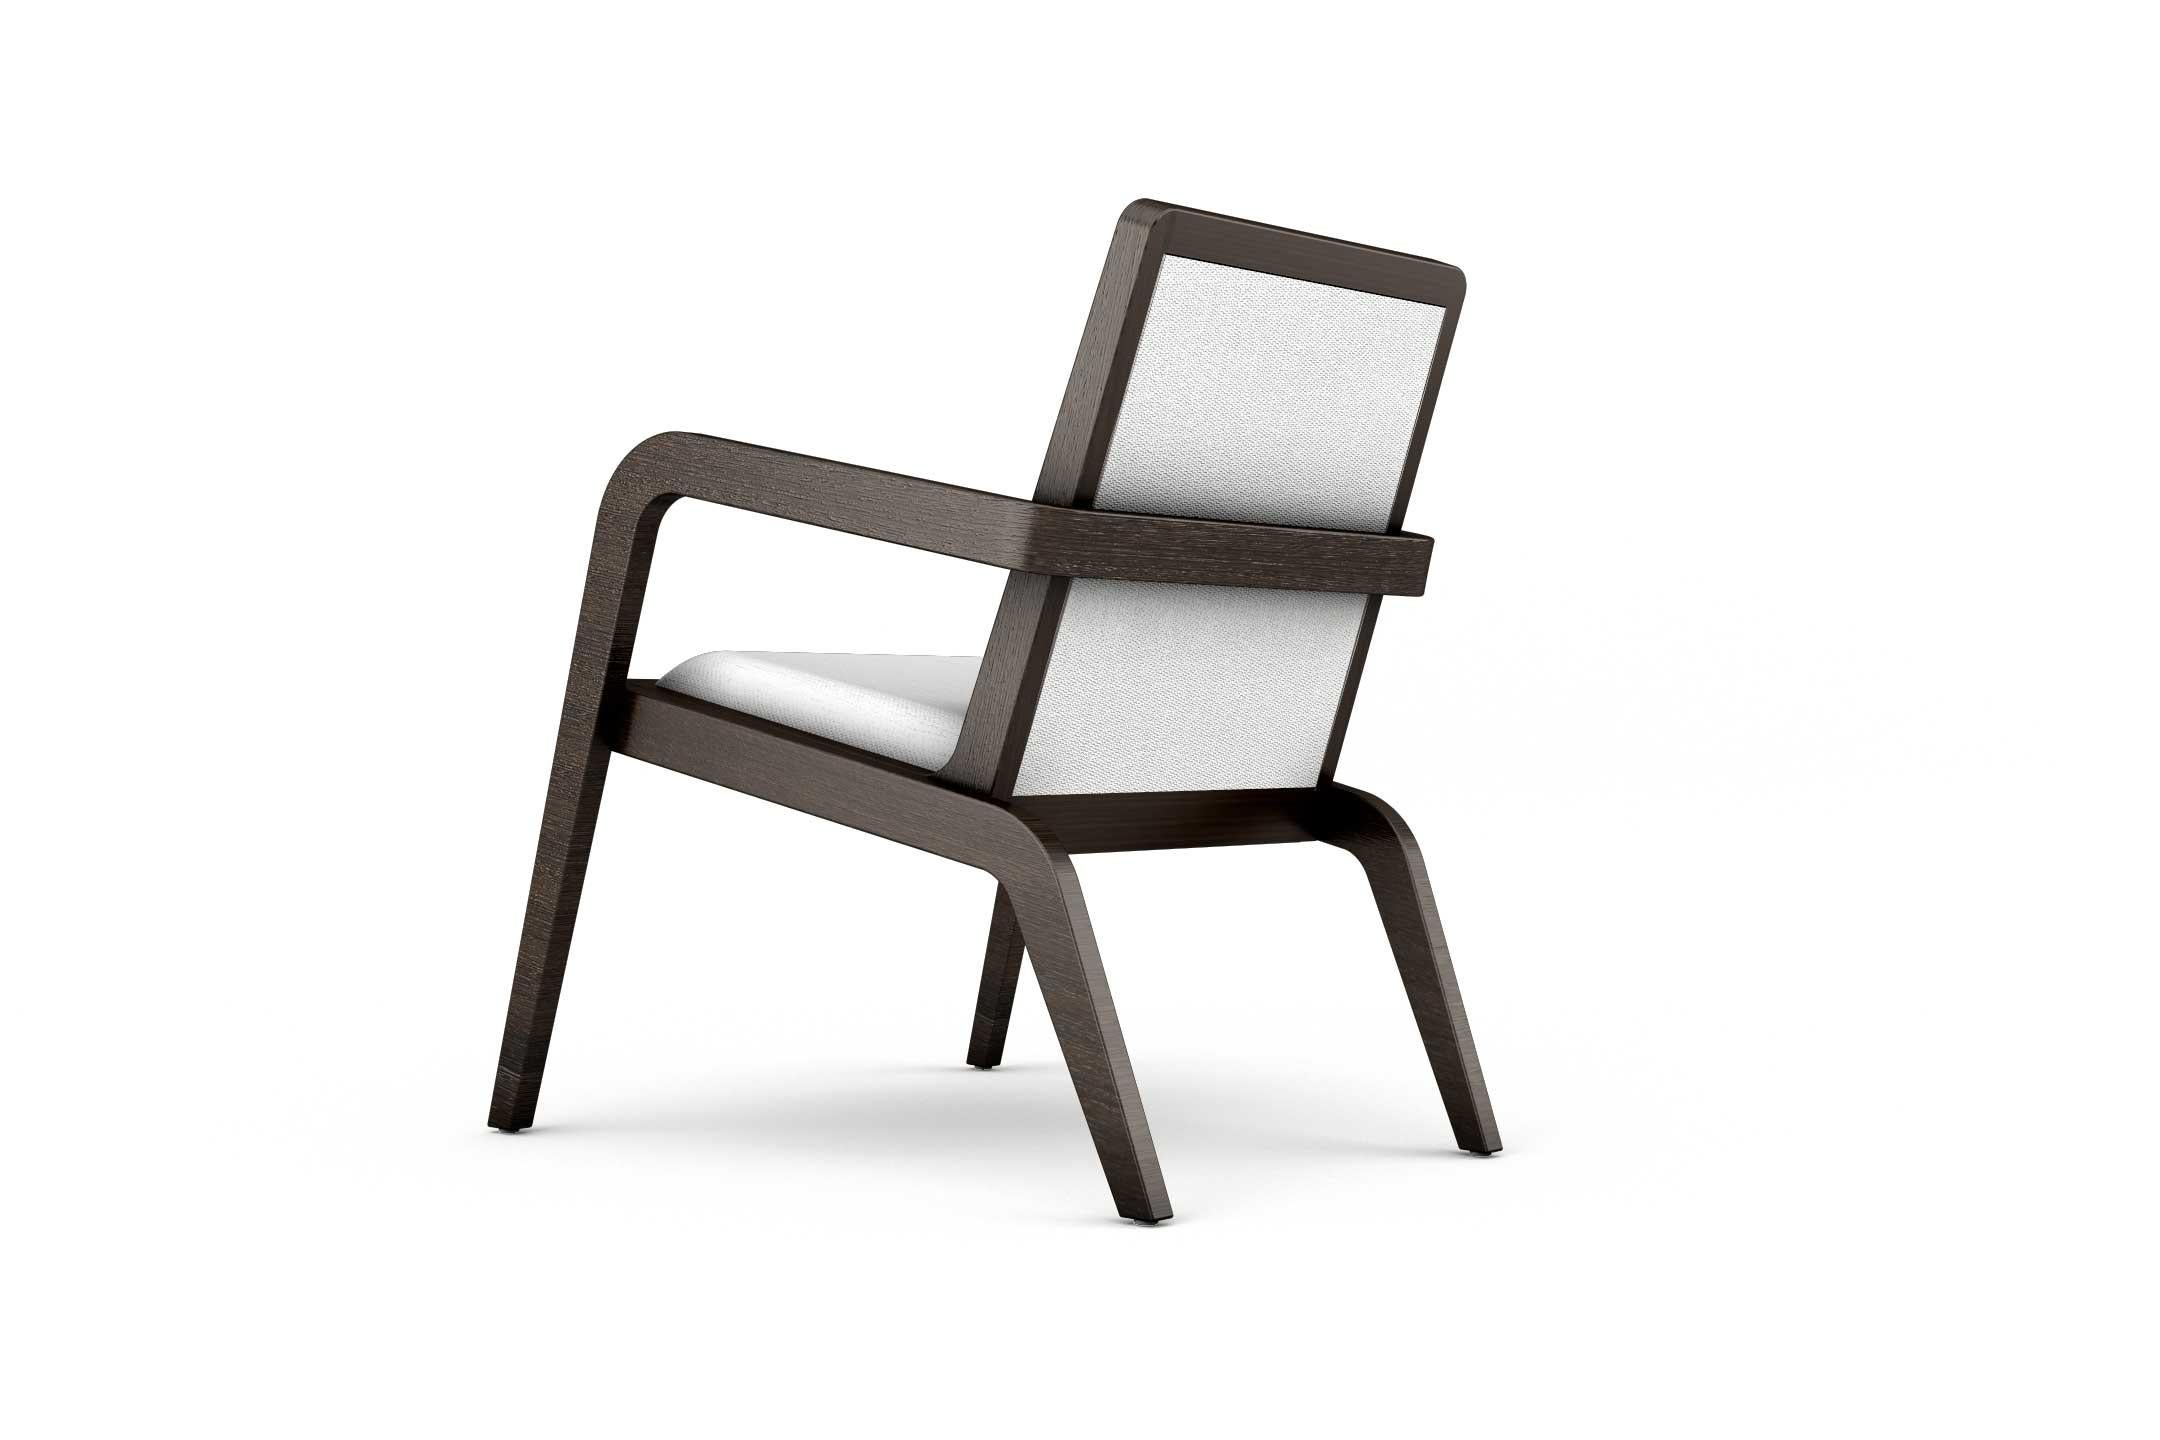 European Umbra Armchair, Modern and Minimalistic Black Armchair with Upholstered Seat For Sale